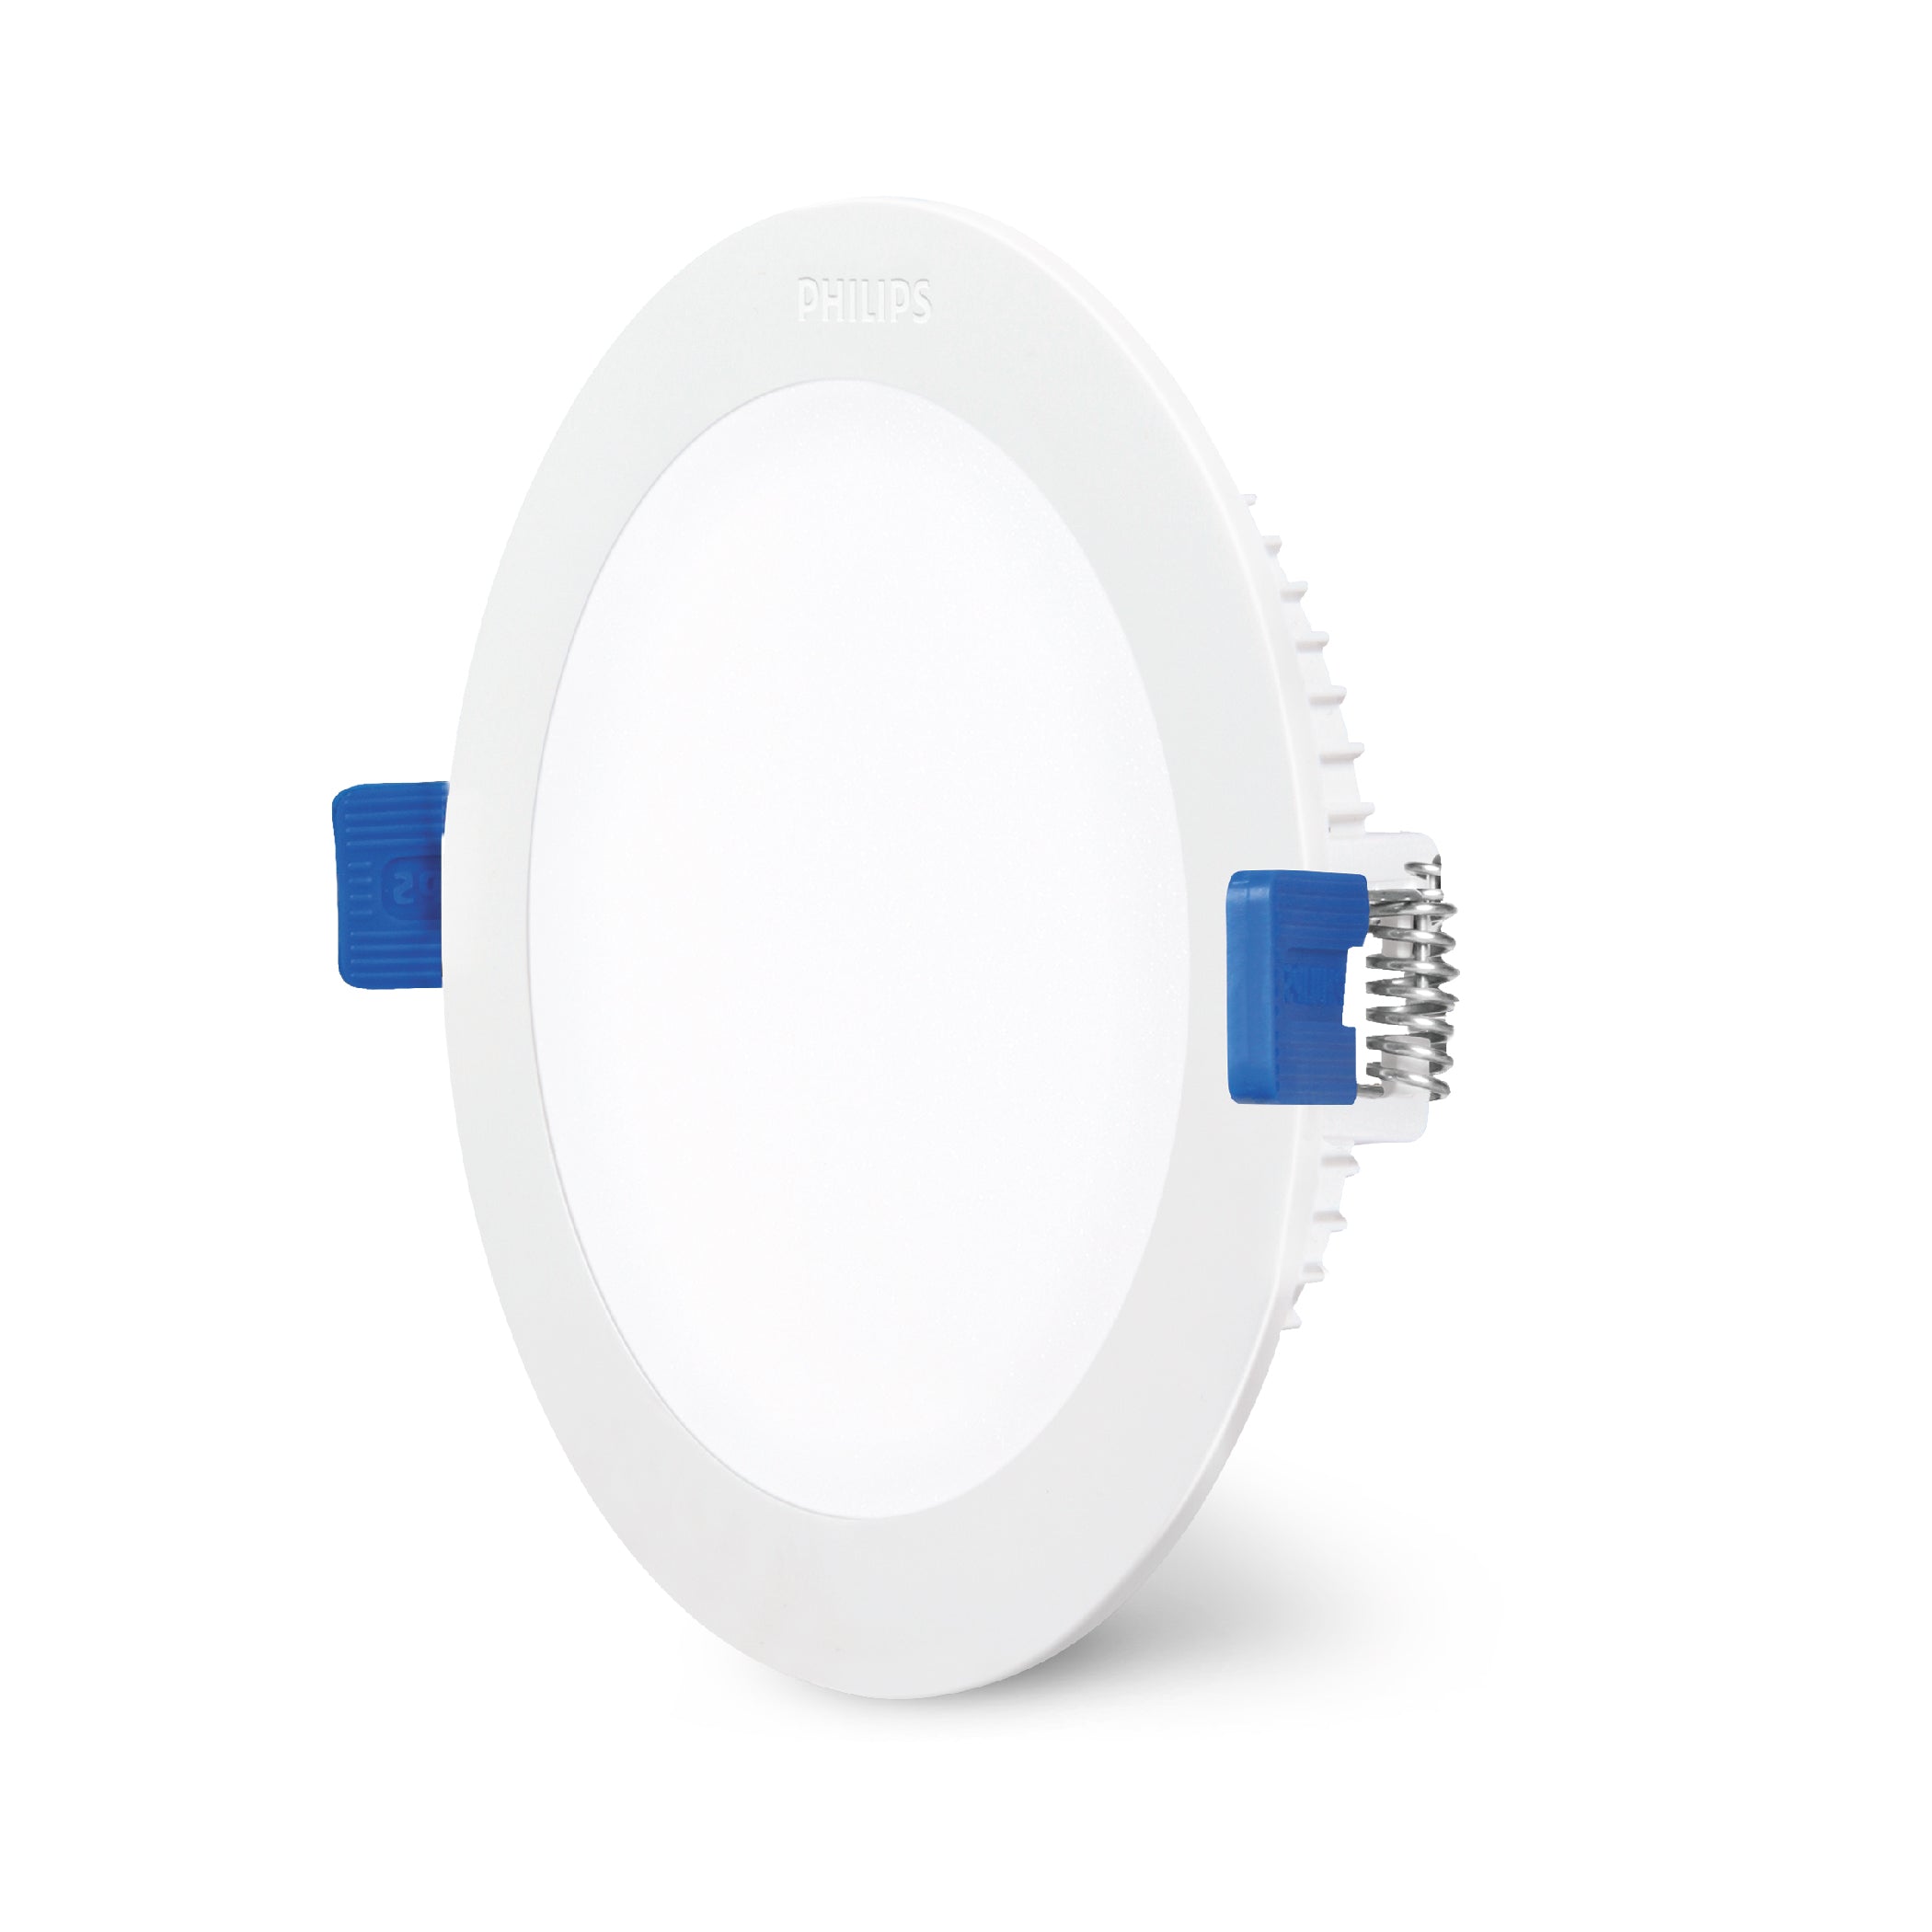 Philips Astra Glow LED Downlight